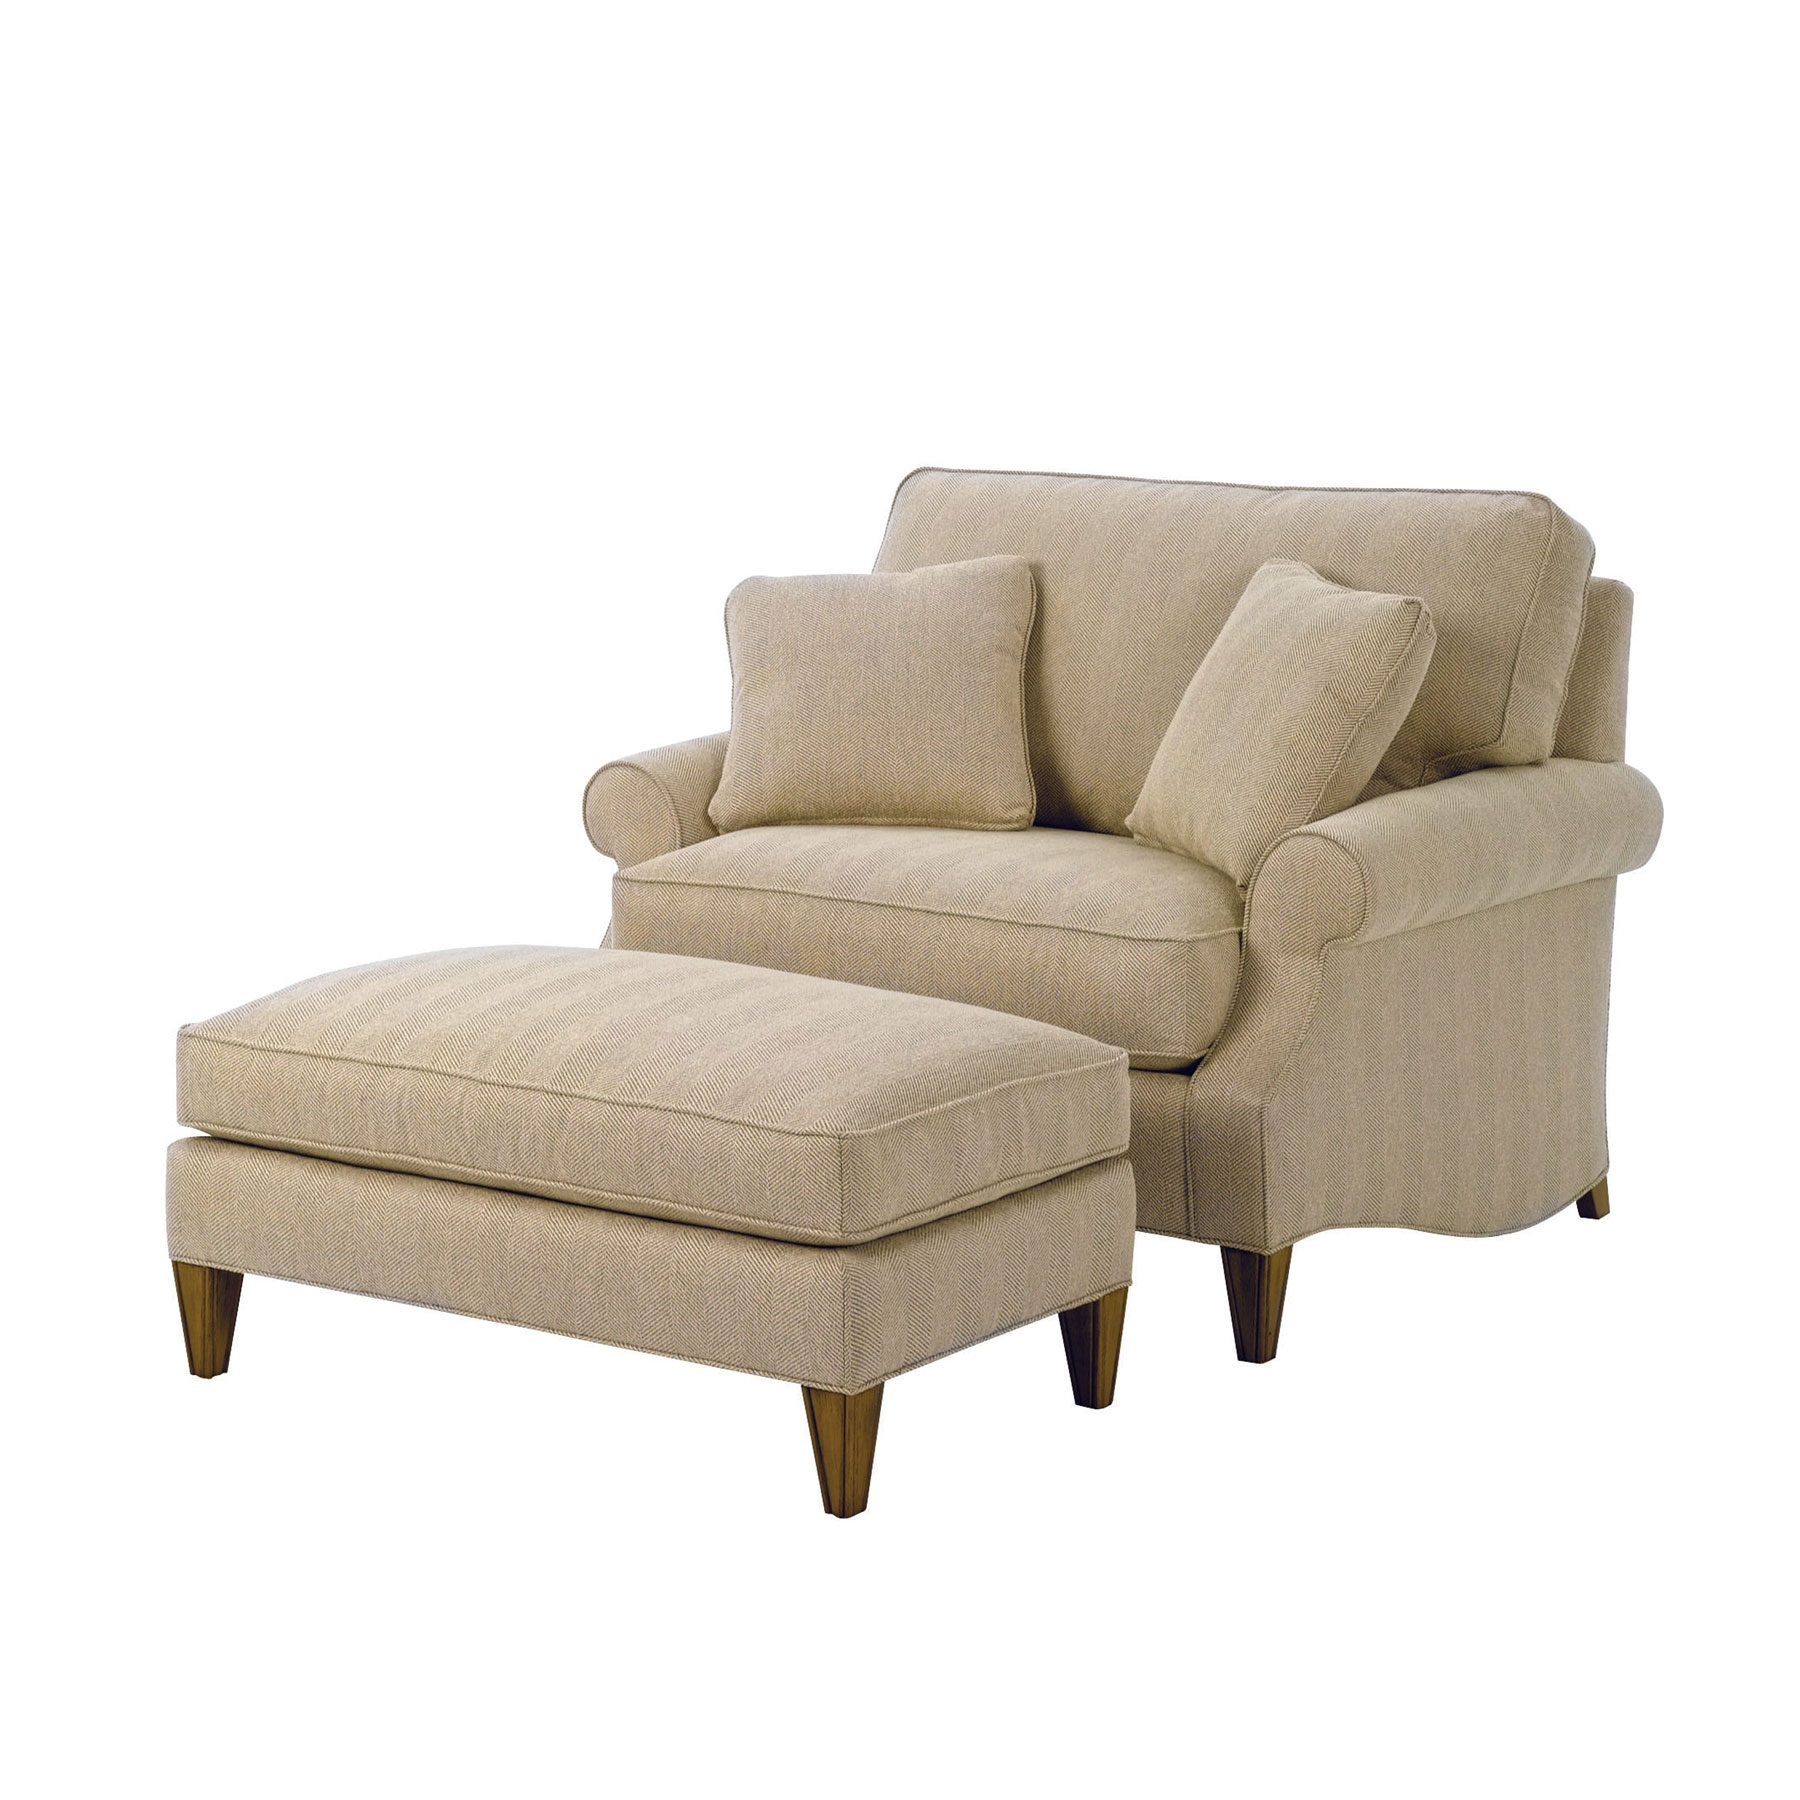 Wesley Hall 1914-49 Campbell Chair & Half with Matching Ottoman in Fabric